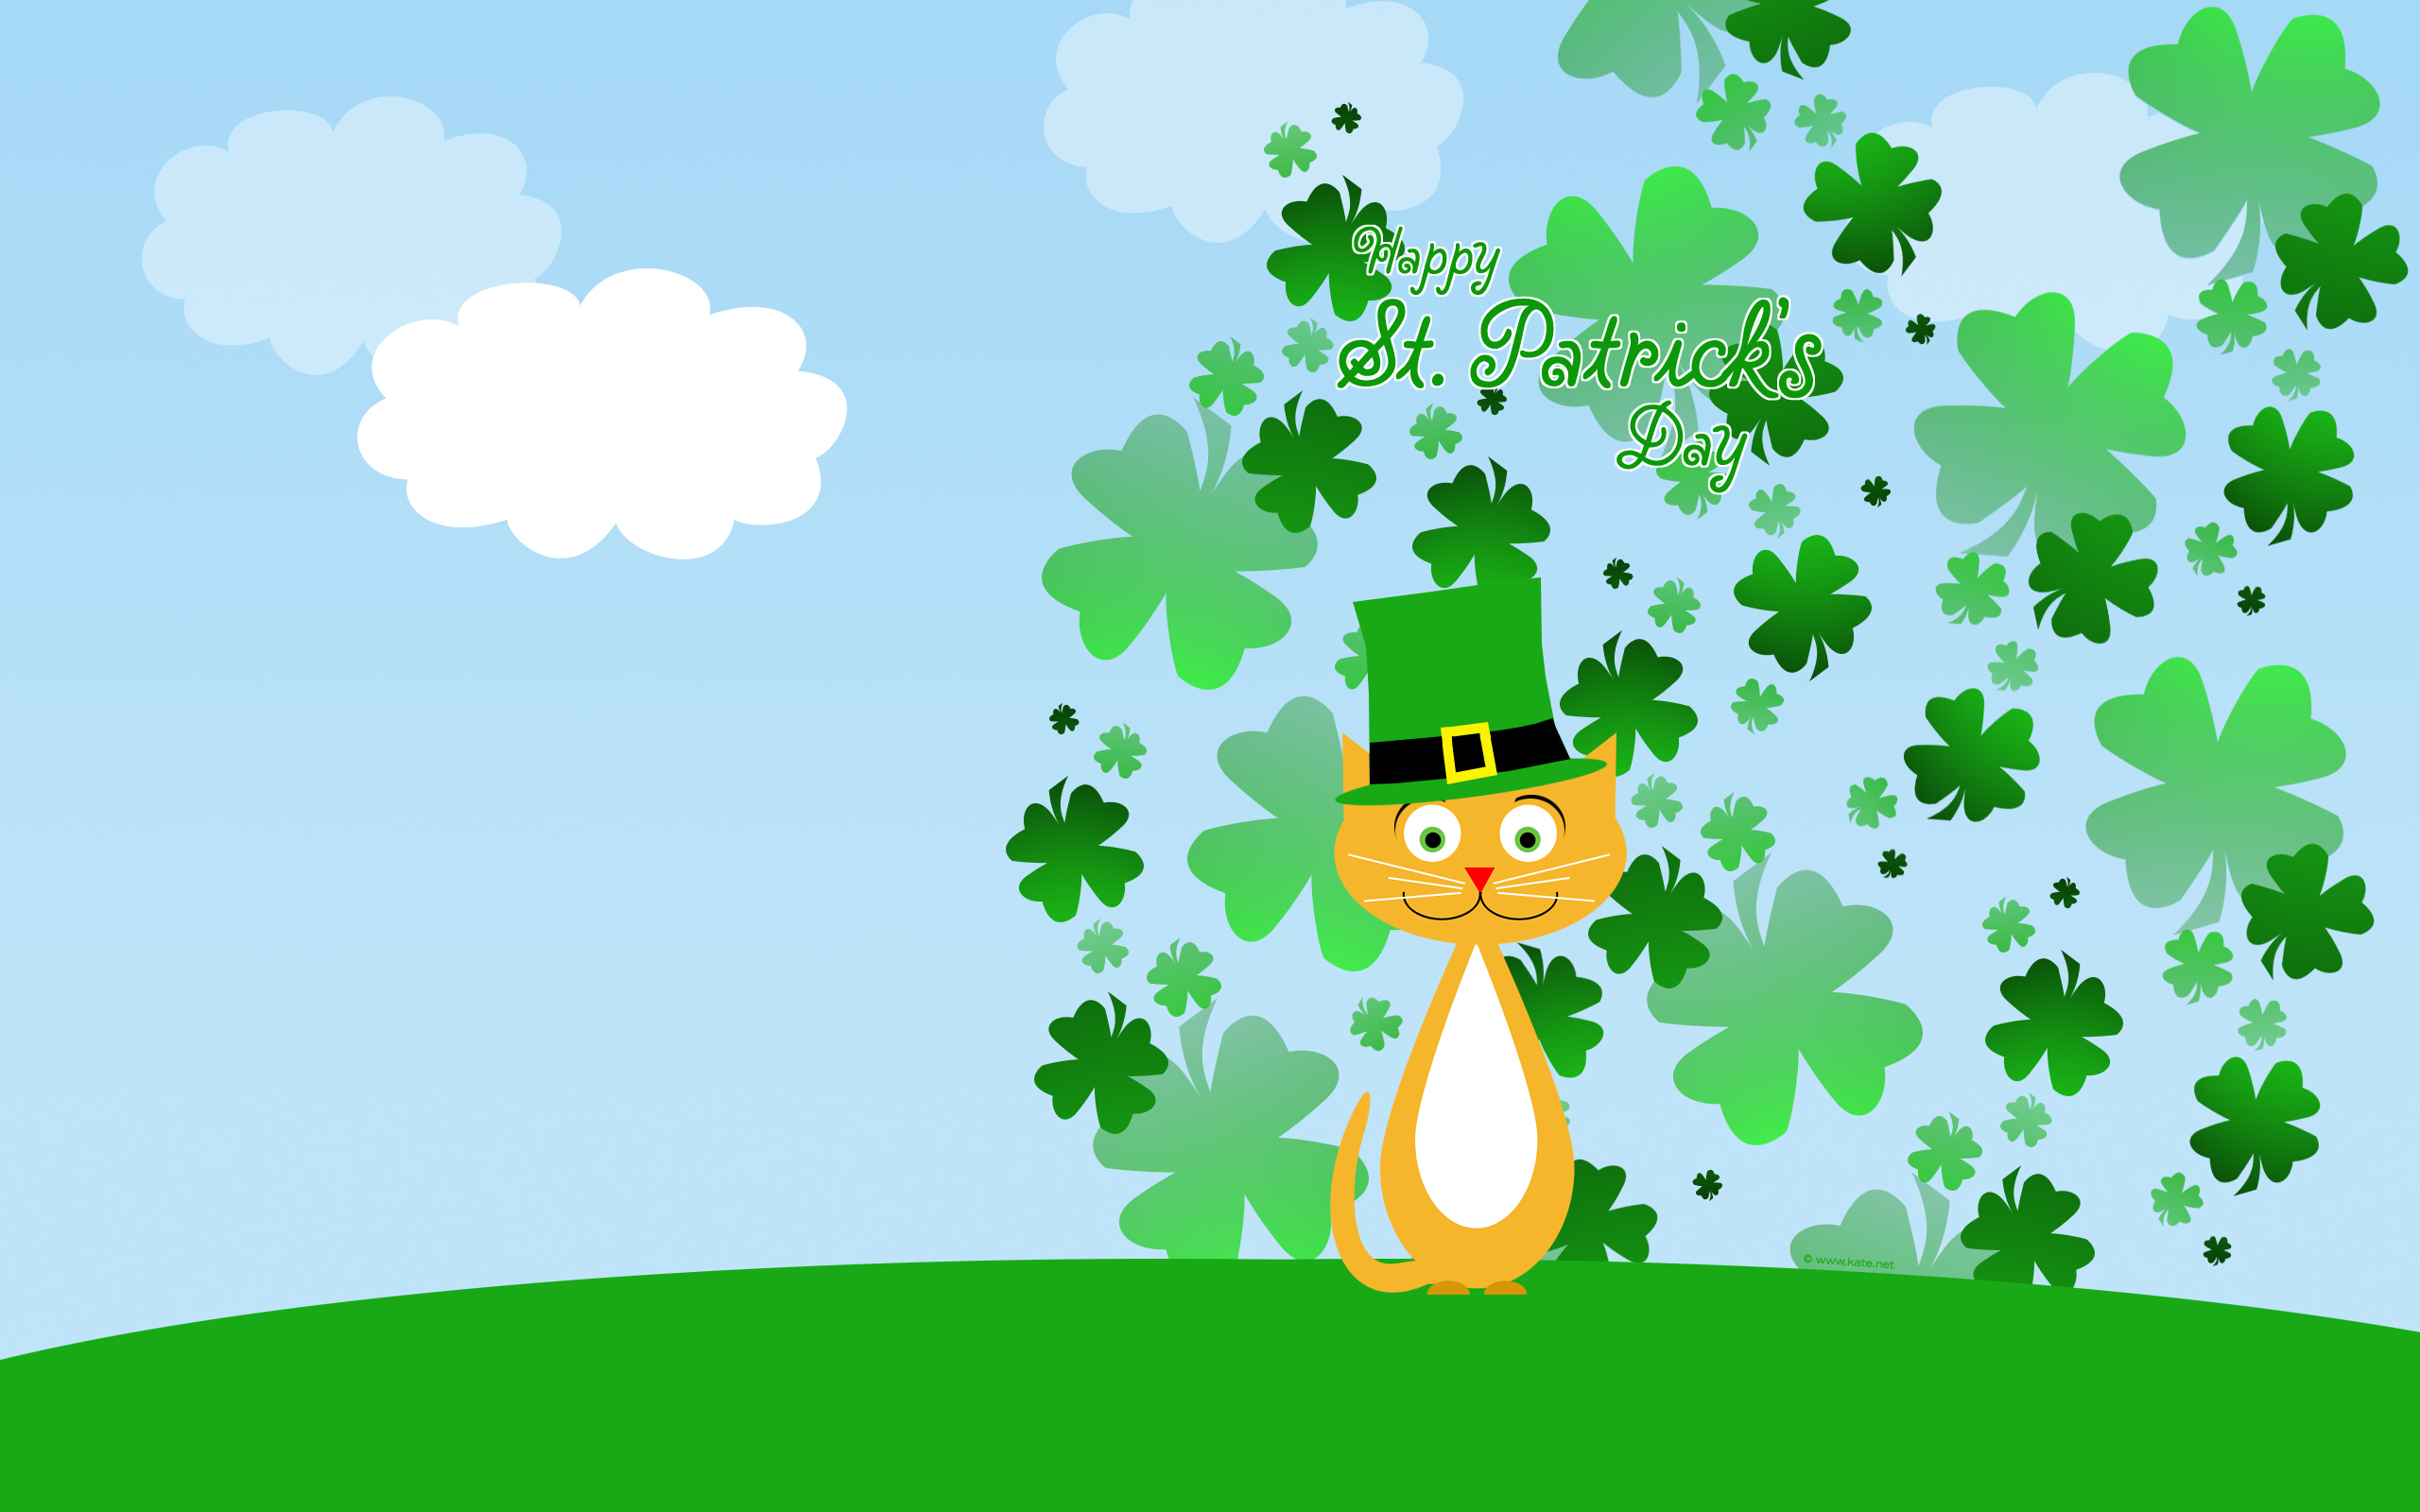  St  Patrick s  Day  HD Wallpaper  Background  Image 